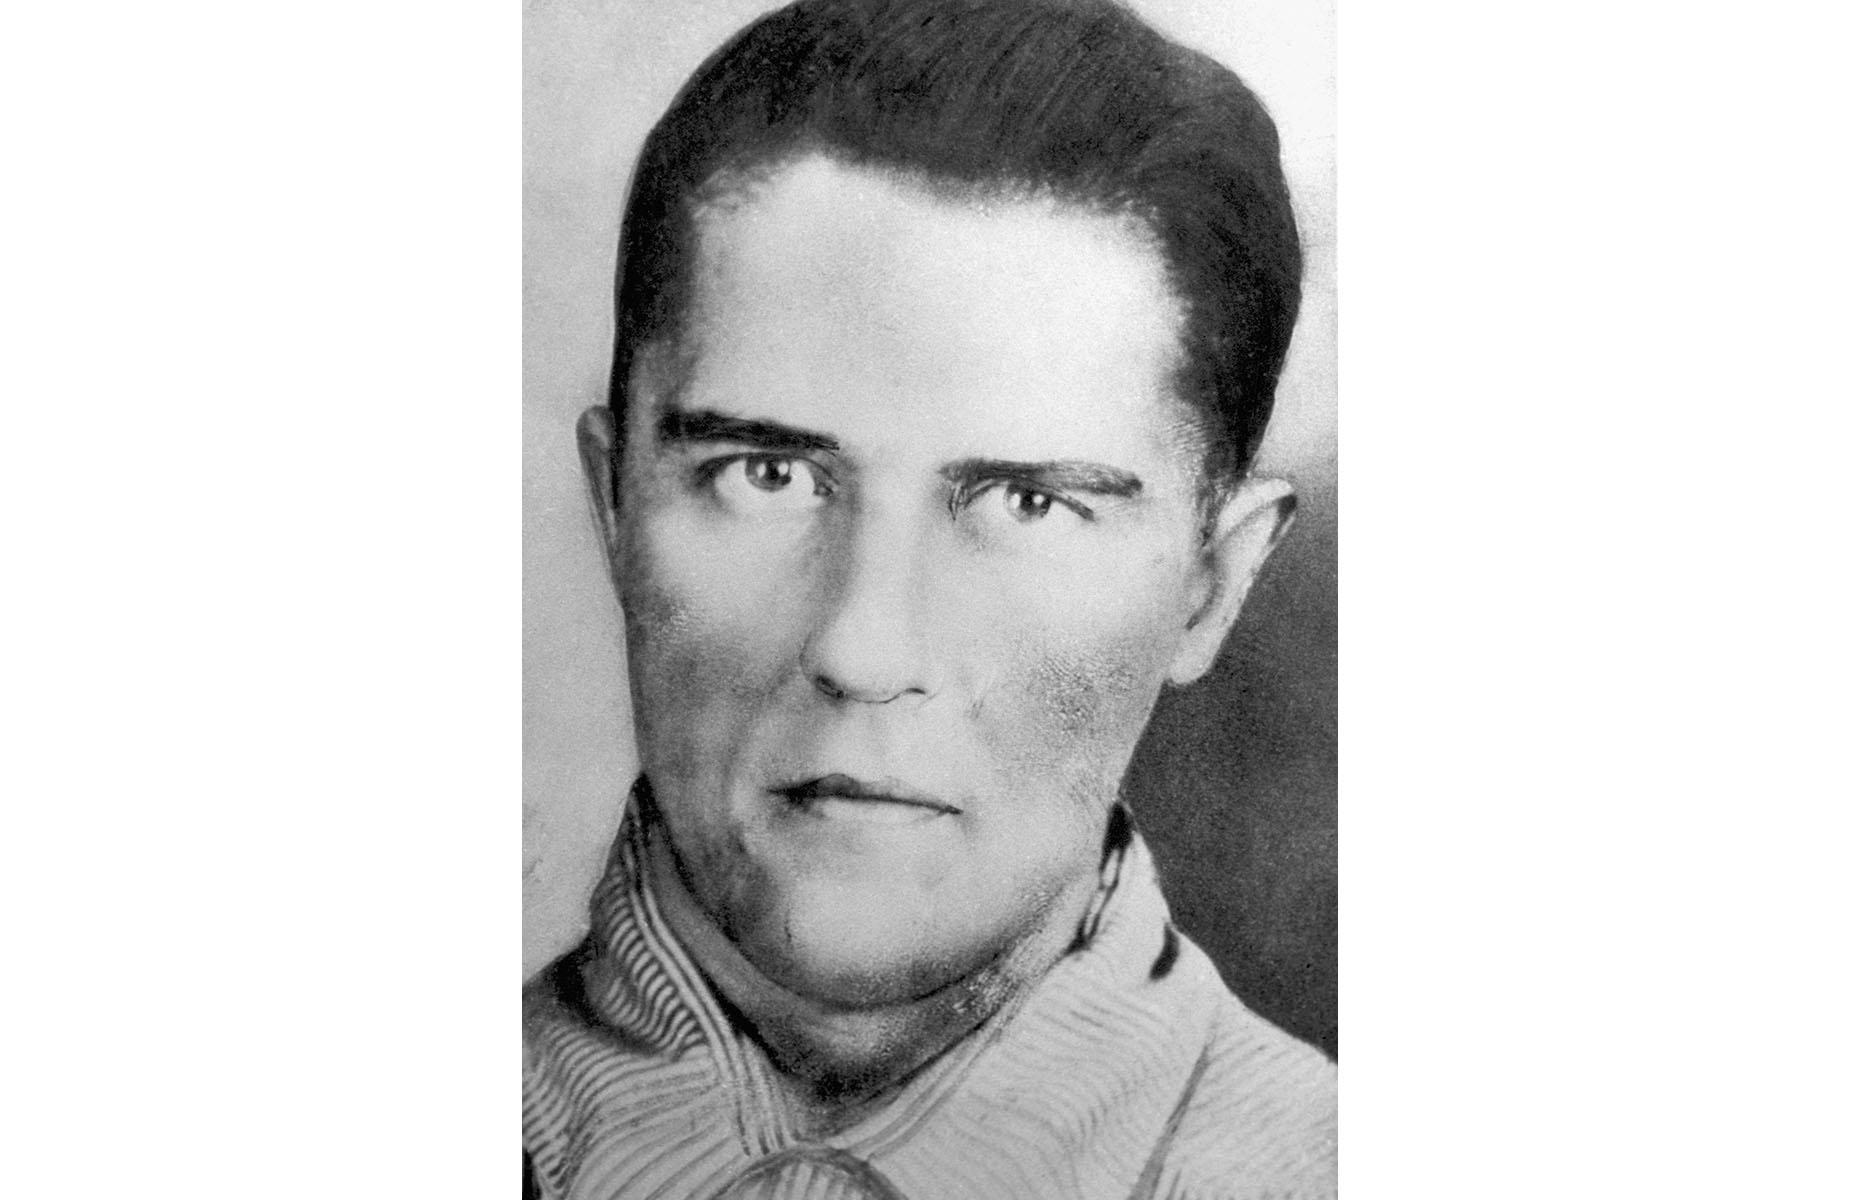 <p>Alvin Karpis is another notorious criminal who served time at Alcatraz. The Canadian-American became involved in crime as early as 10 years old, and his criminal career peaked with his involvement in the notorious Karpis-Barker gang through 1930s. Their deeds included bank robbing, kidnapping and murder, and Karpis was ultimately captured and sentenced to life imprisonment at Alcatraz from 1936. He was the last so-called 'public enemy number one' taken down by police, a spot previously occupied by 'Baby Face' Nelson and 'Pretty Boy' Floyd.</p>